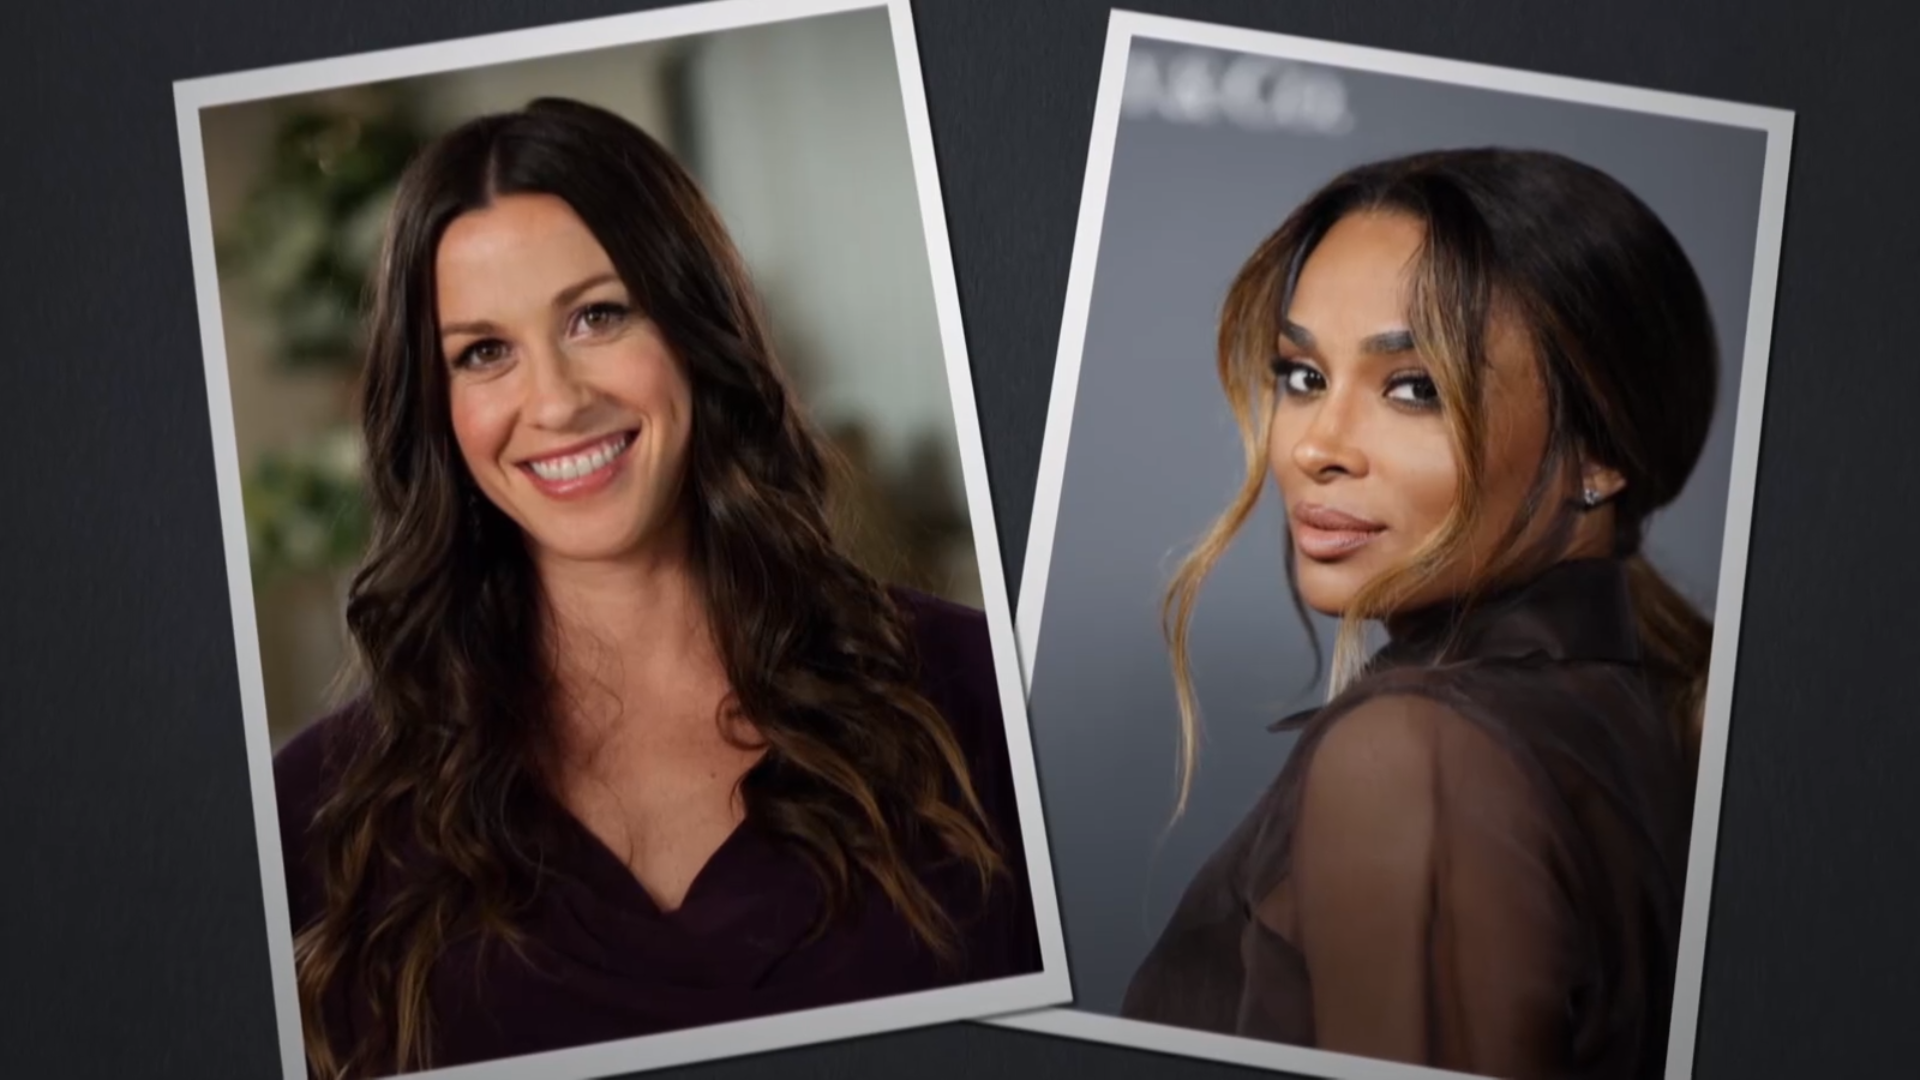 Ciara, Alanis Morissette learn they have already met their distant famous  cousins